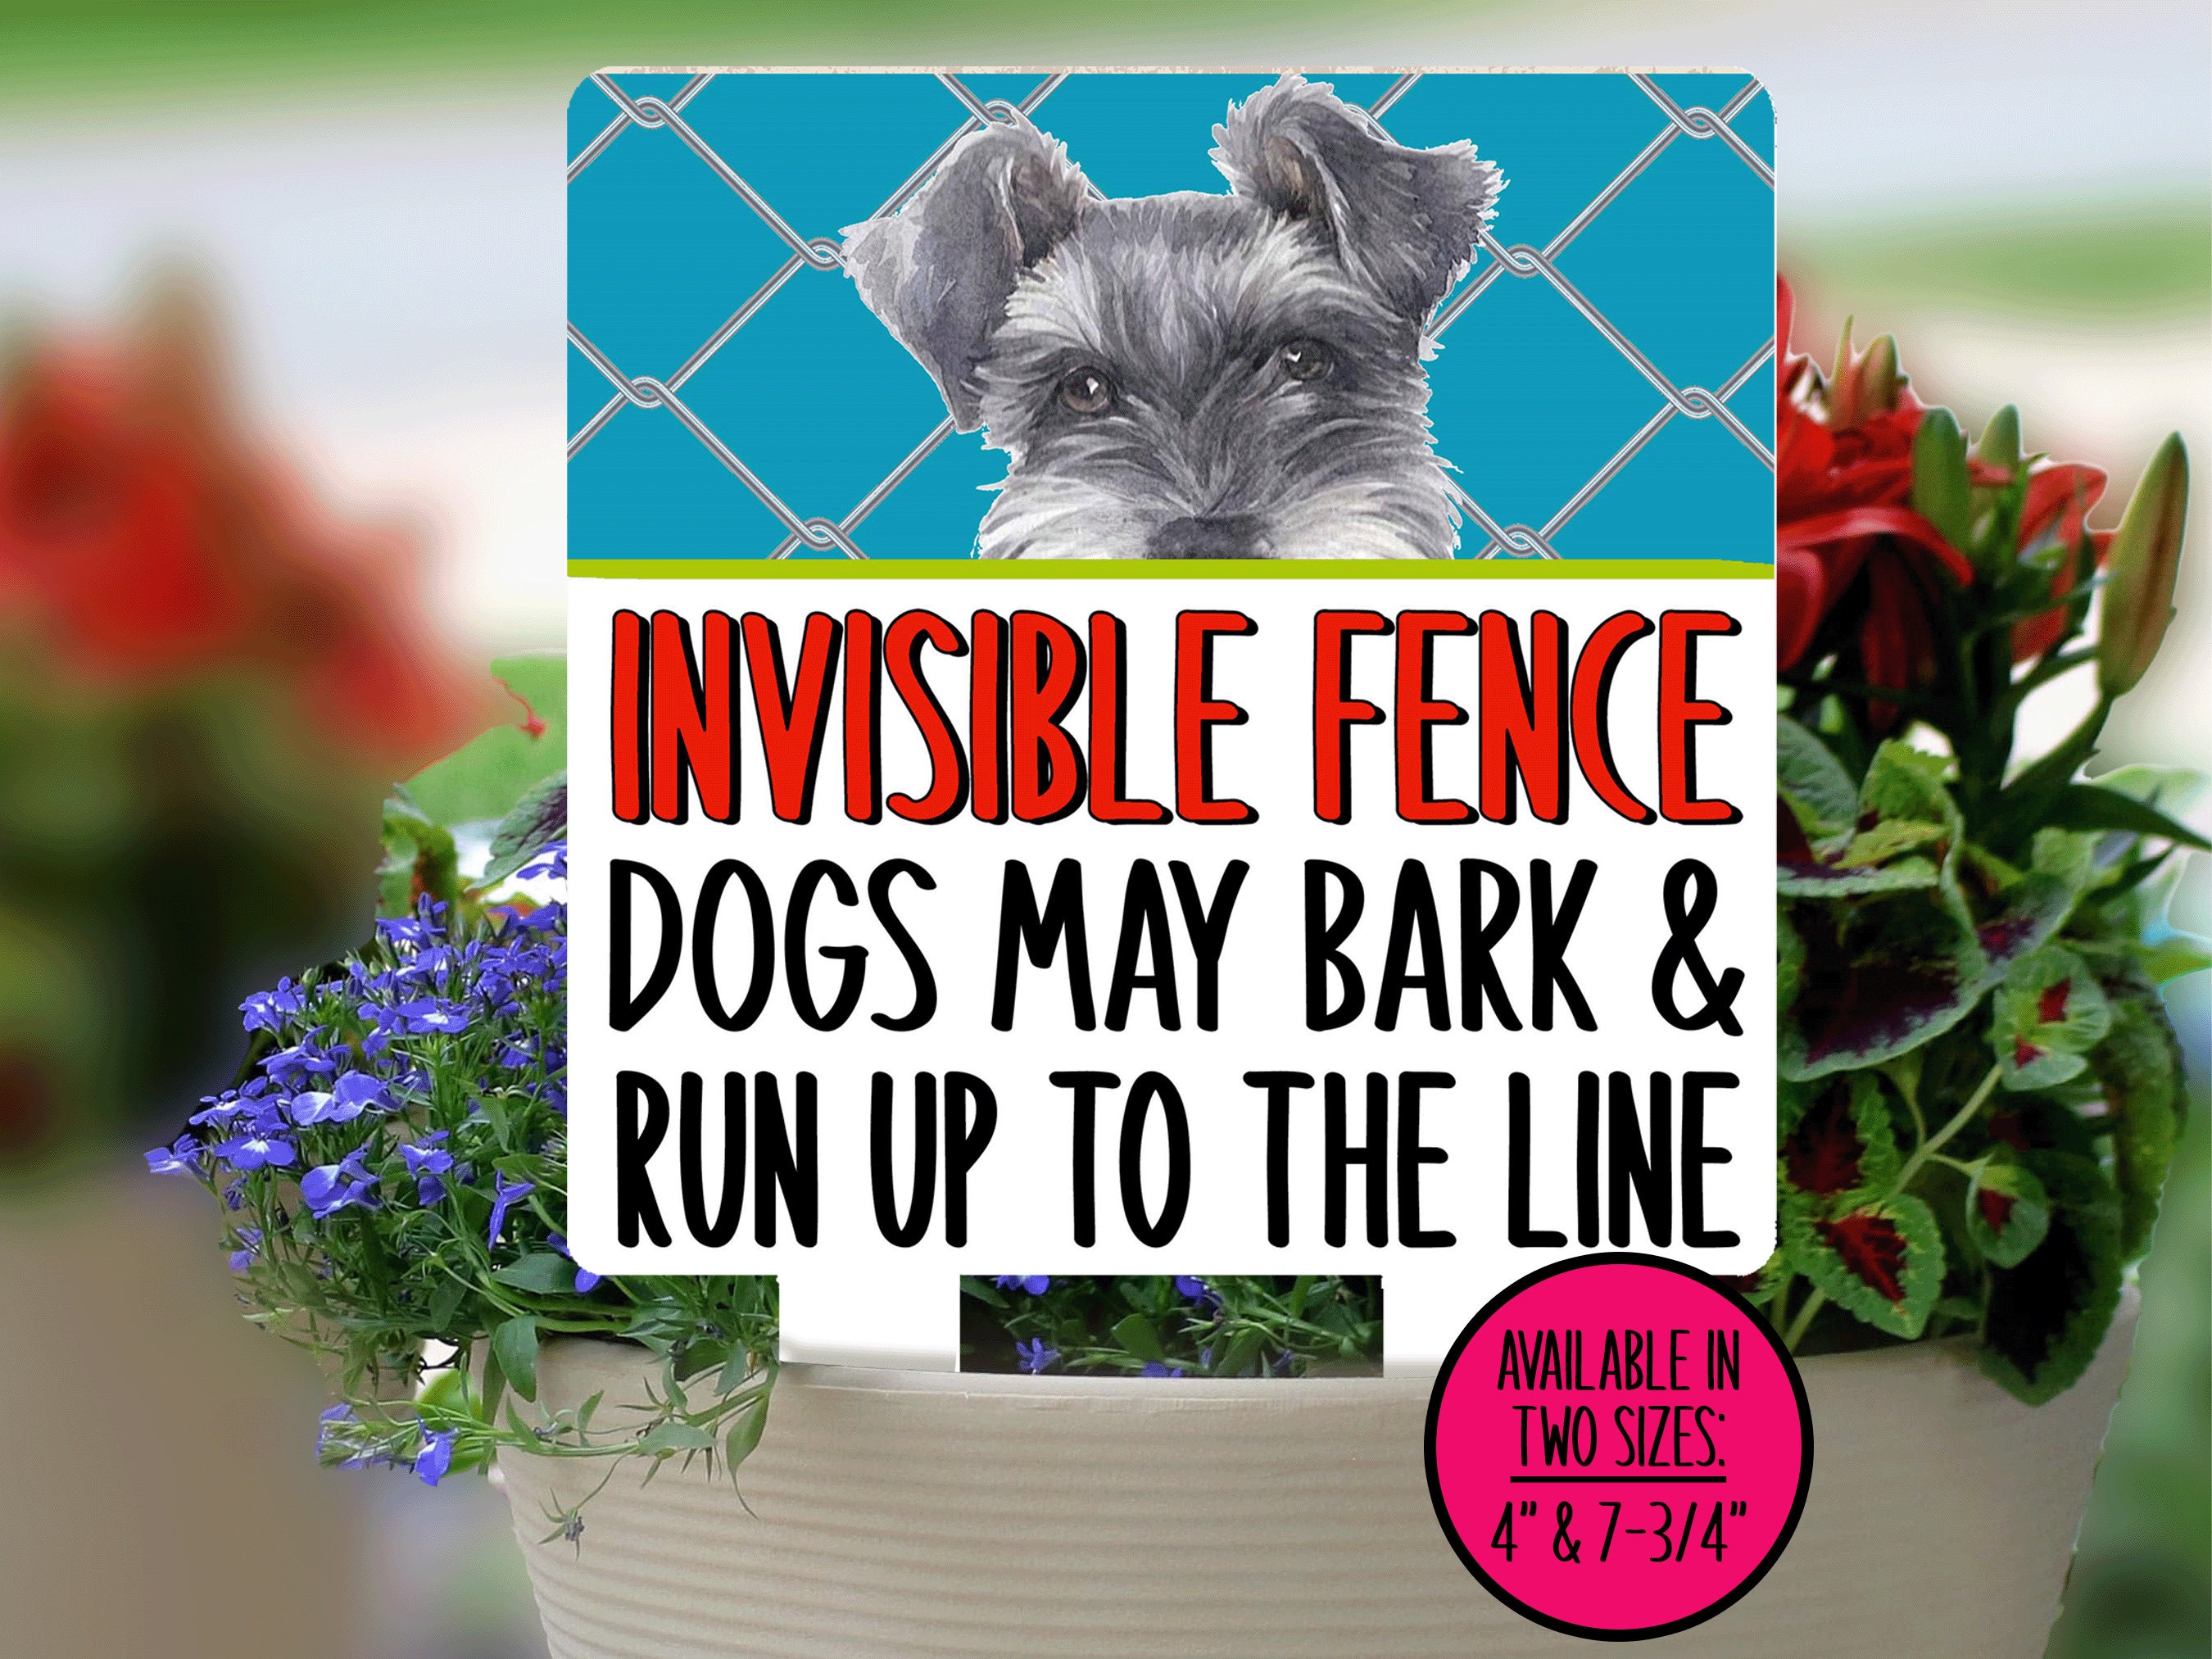 can a small dog use an invisible fence